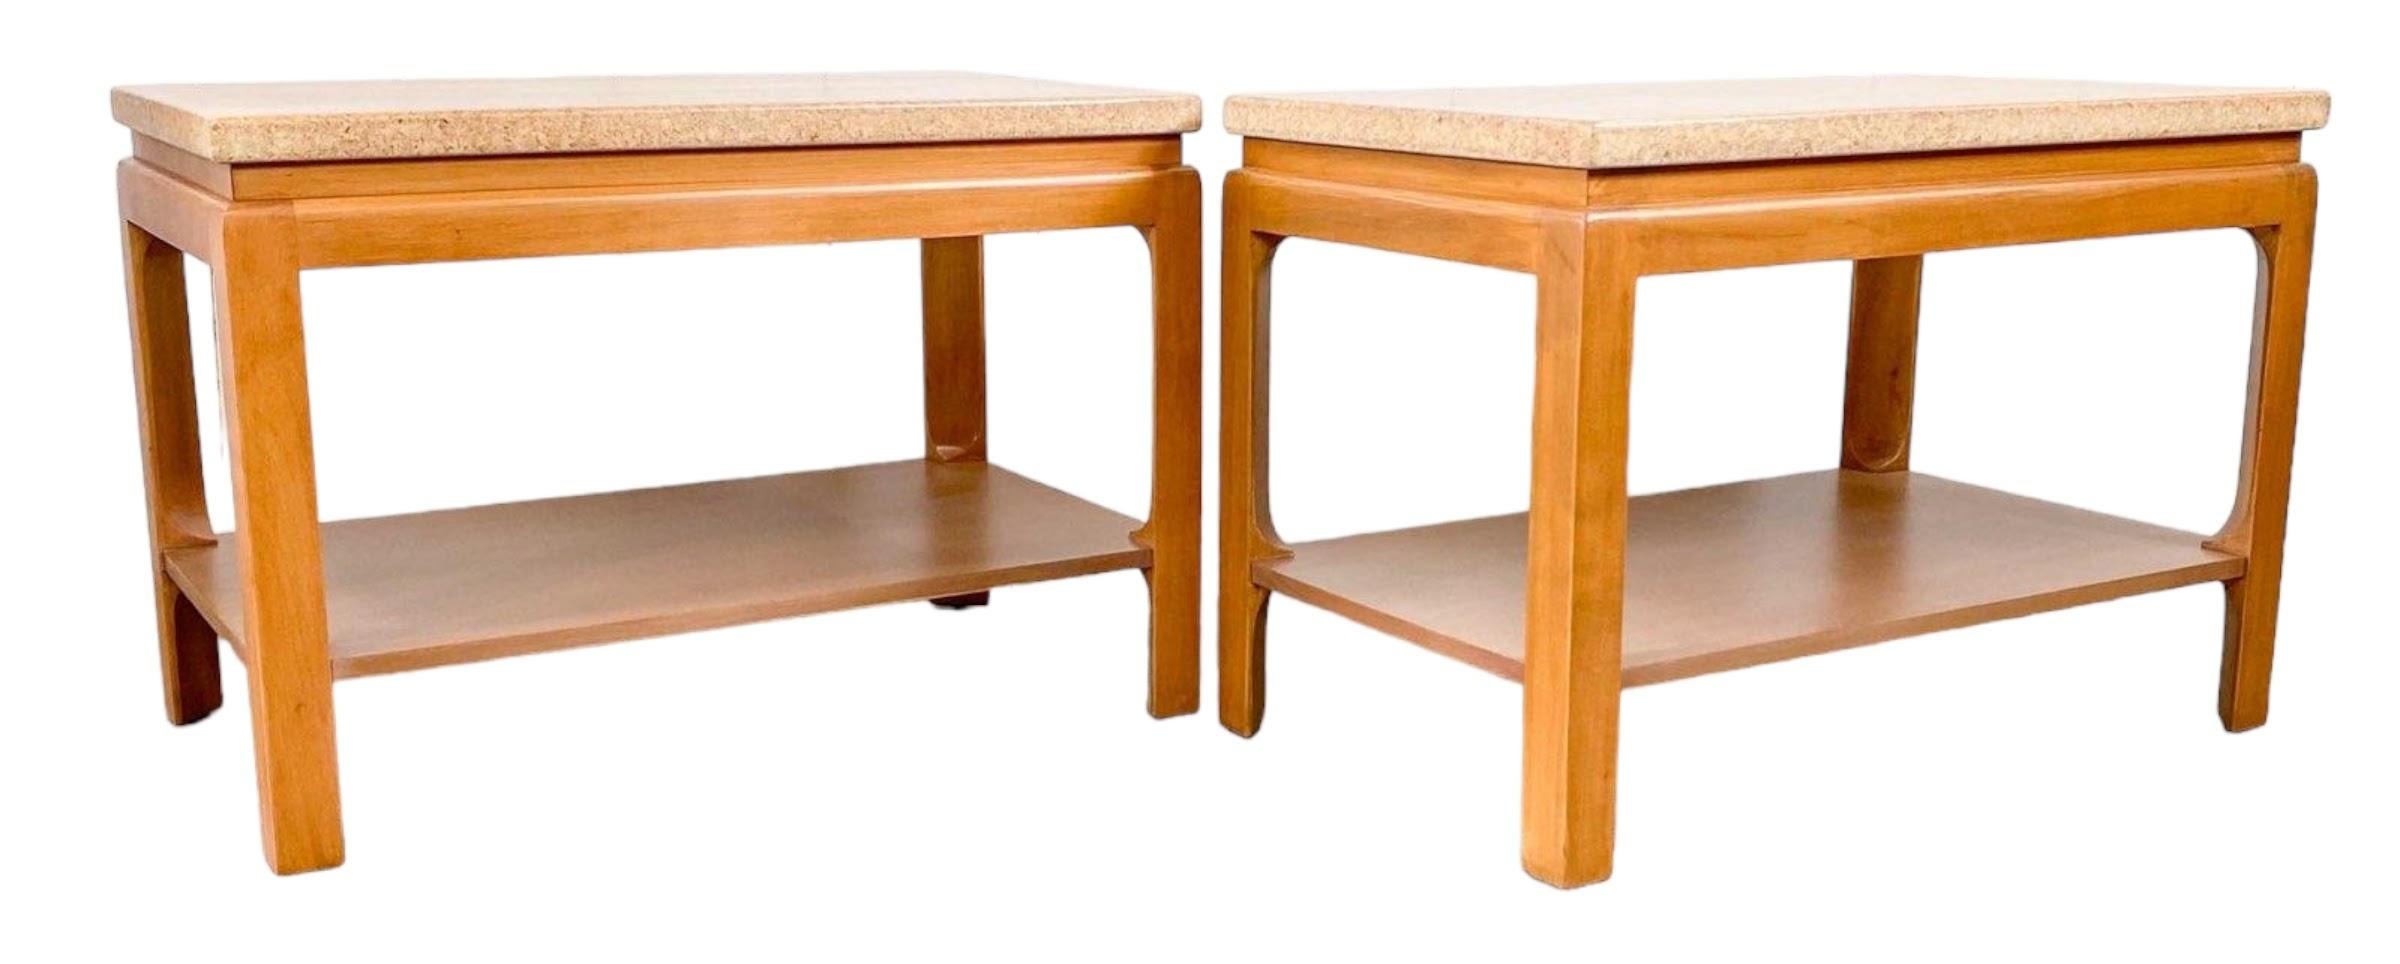 American Pair of Paul T. Frankl for Johnson Cork Top Two Tier Side or End Tables, 1950s For Sale